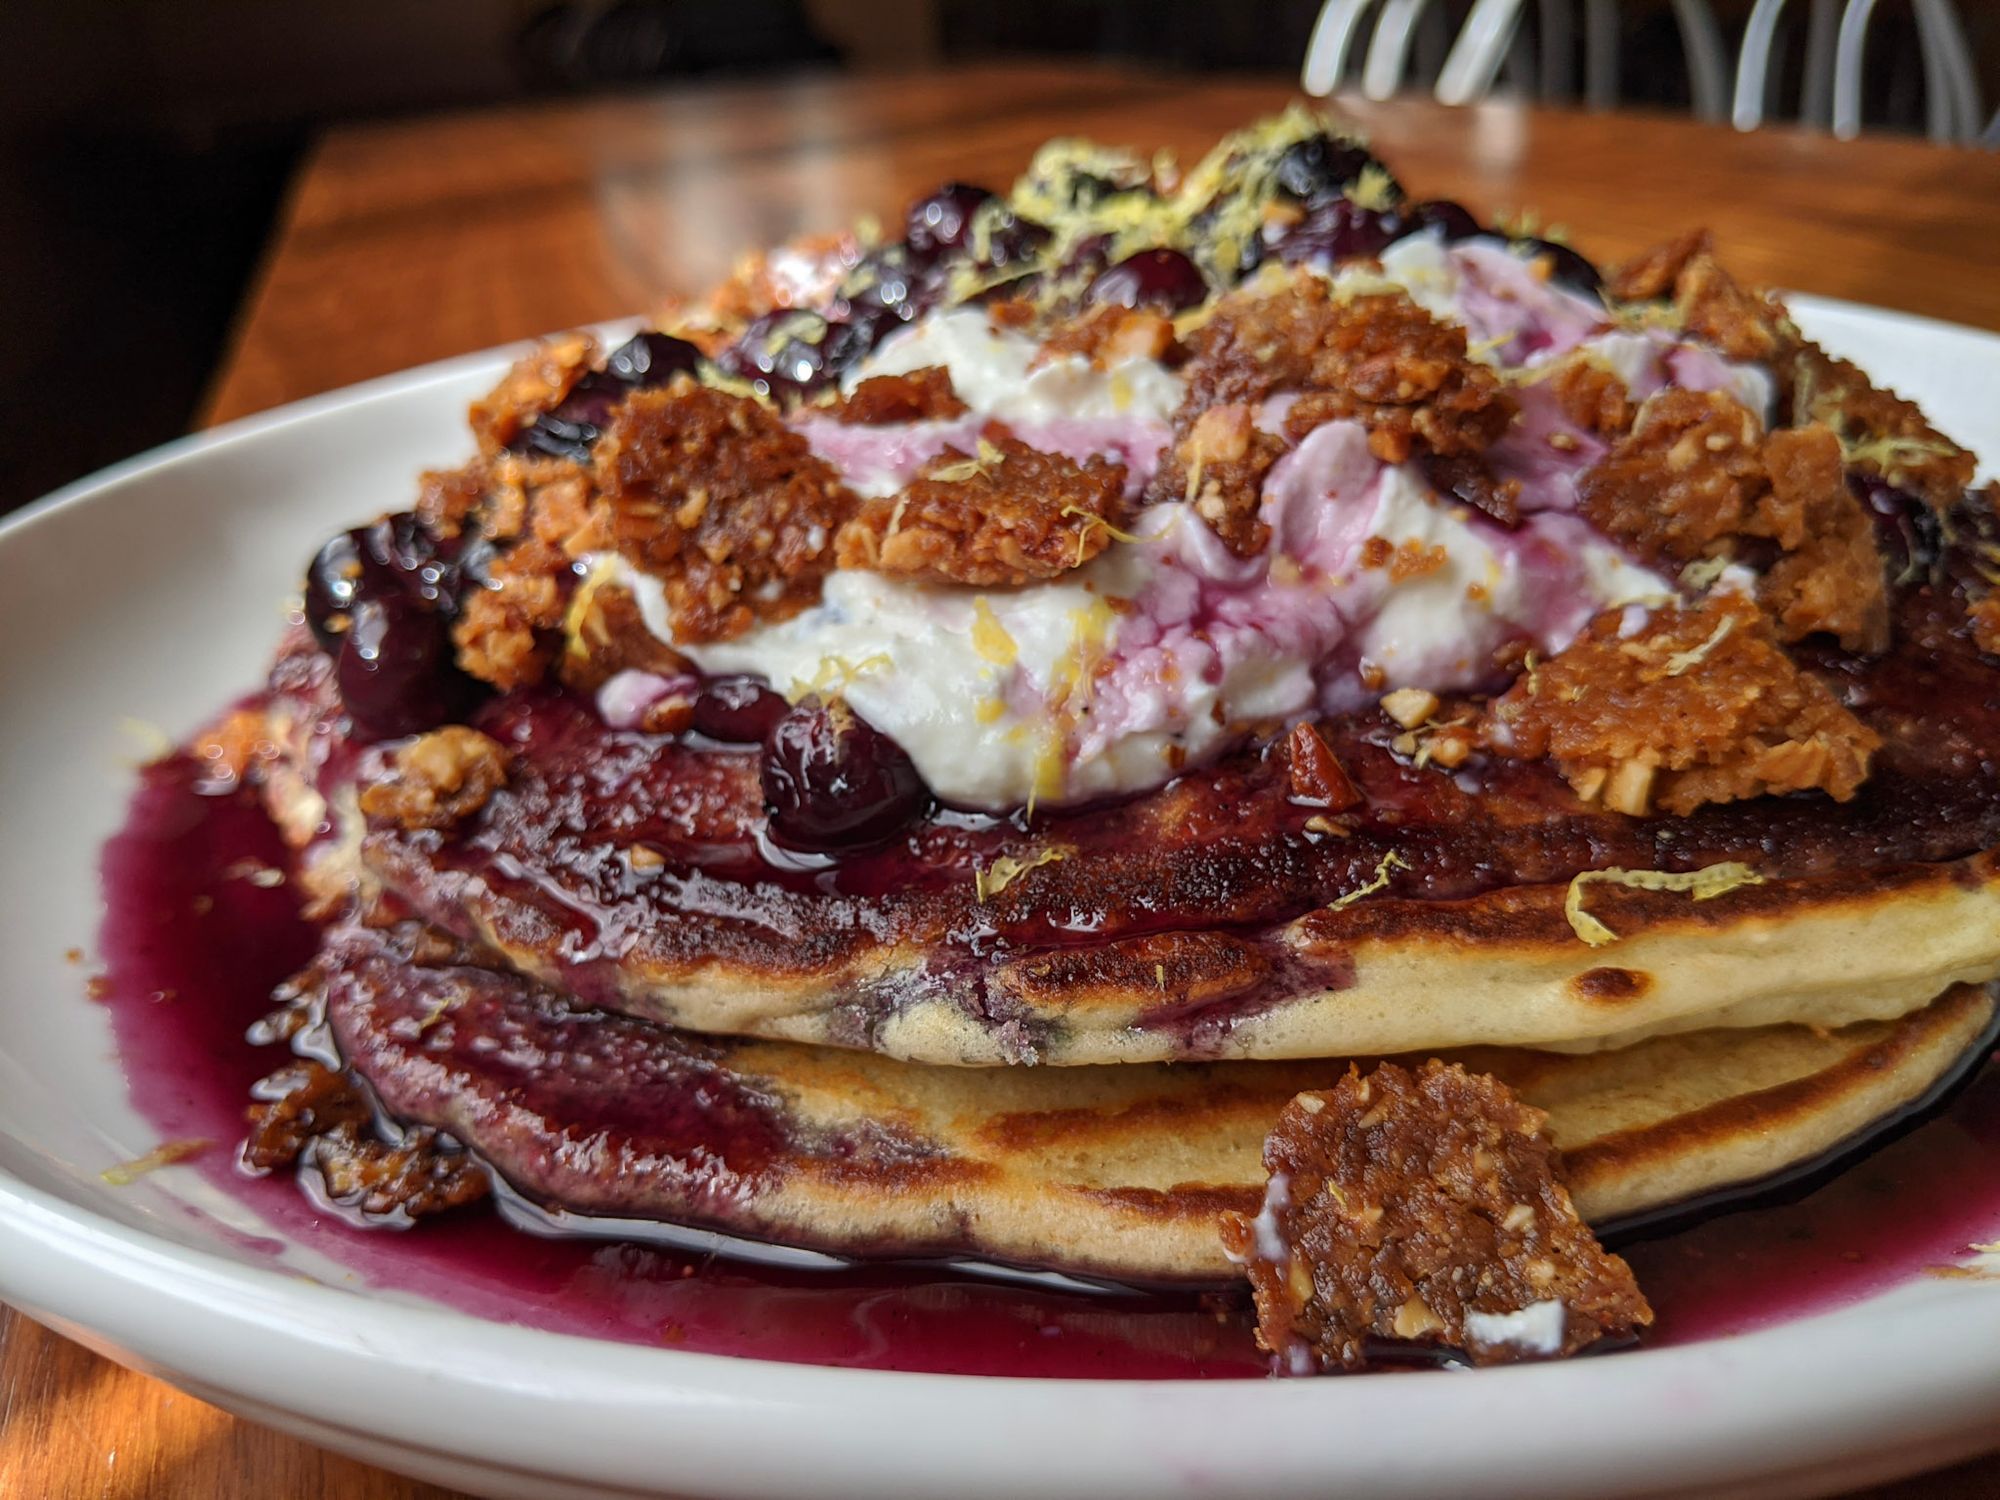 Blueberry pancakes with lemon-ricotta cream and crunchy almond cookie crumbles